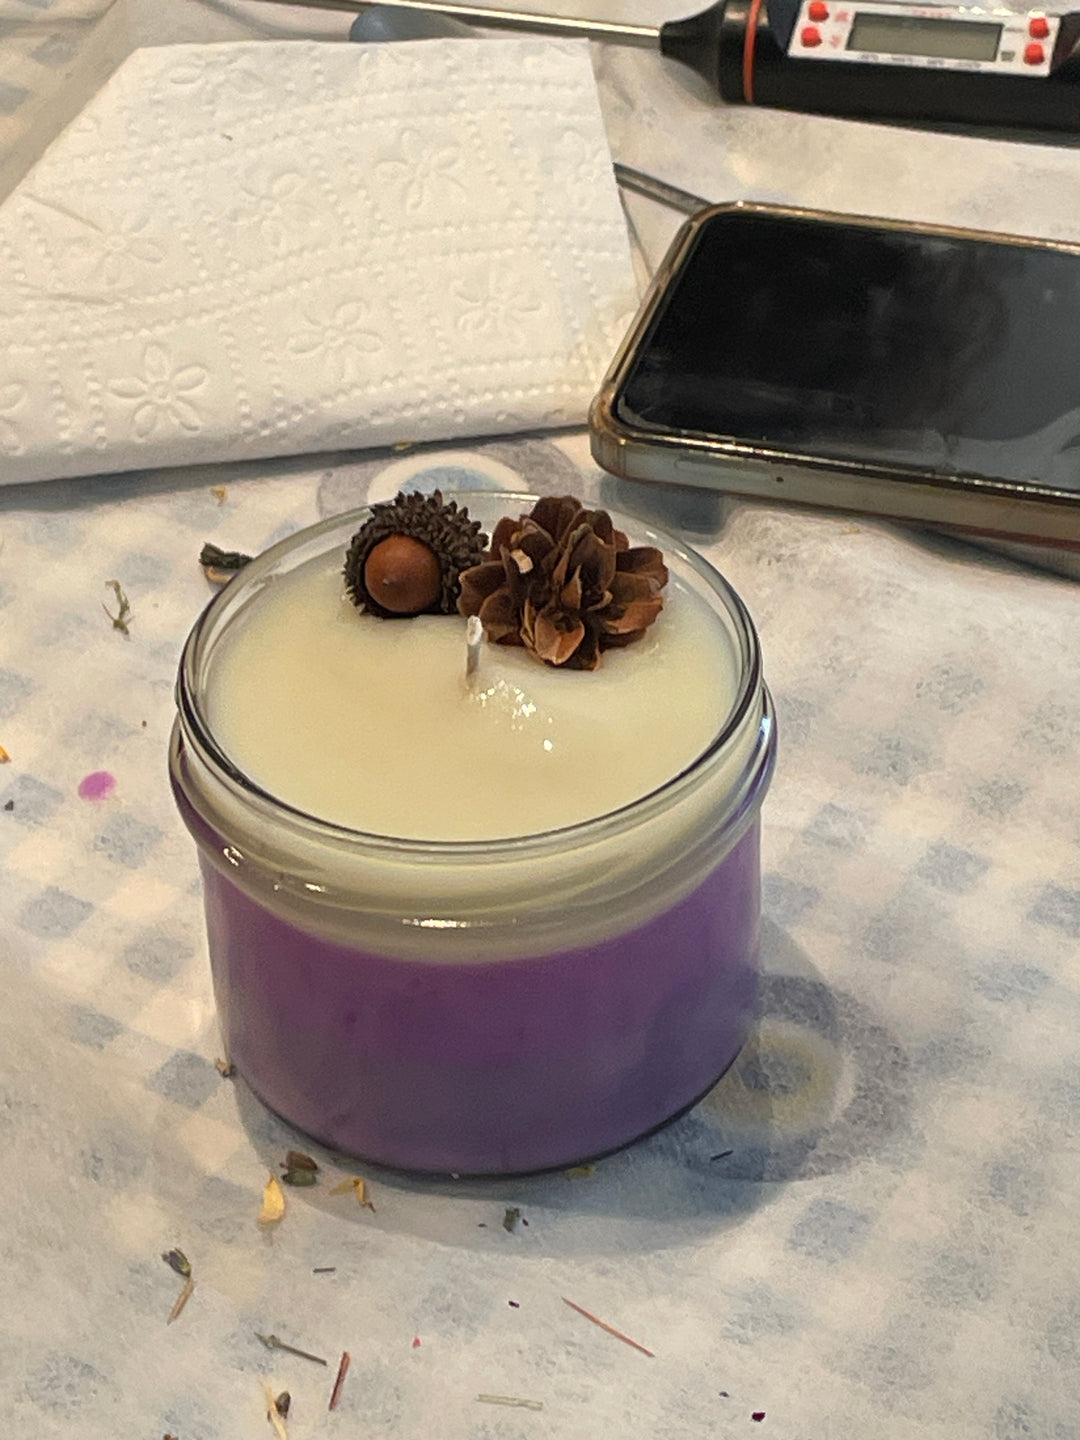 A workshop for making natural and scented candles